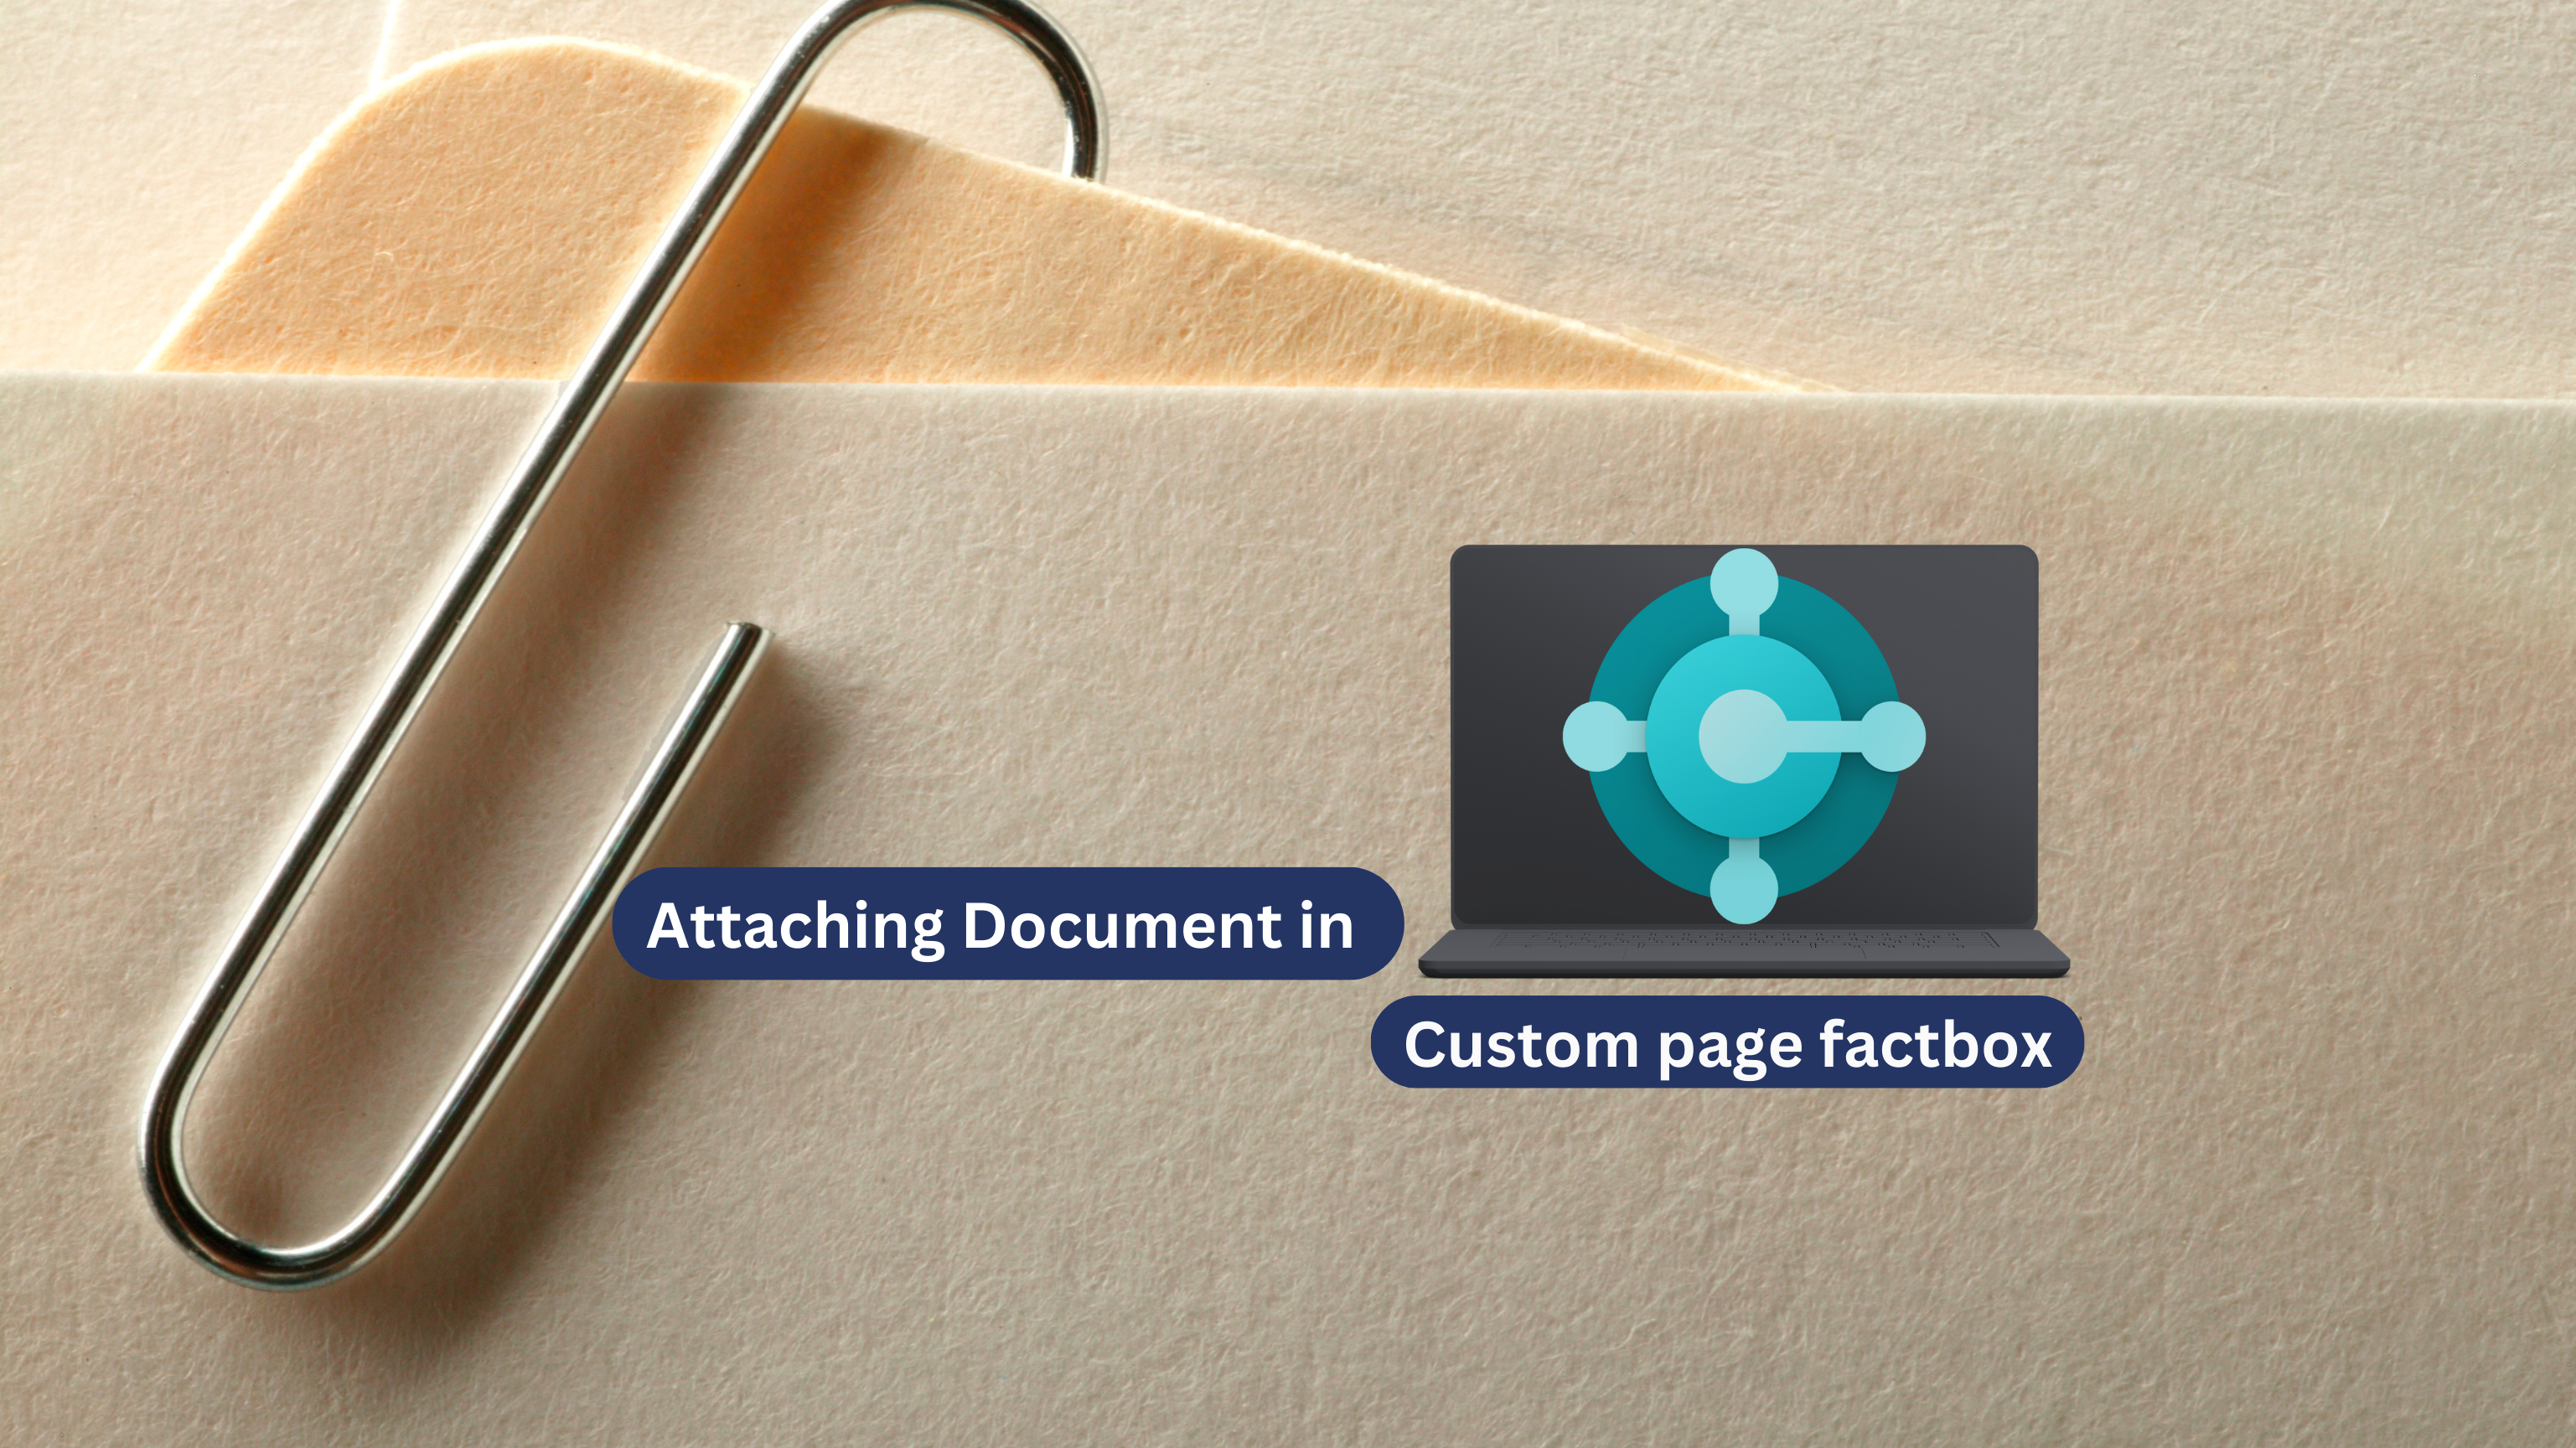 How to Attach Document in Custom page factbox in Business Central?